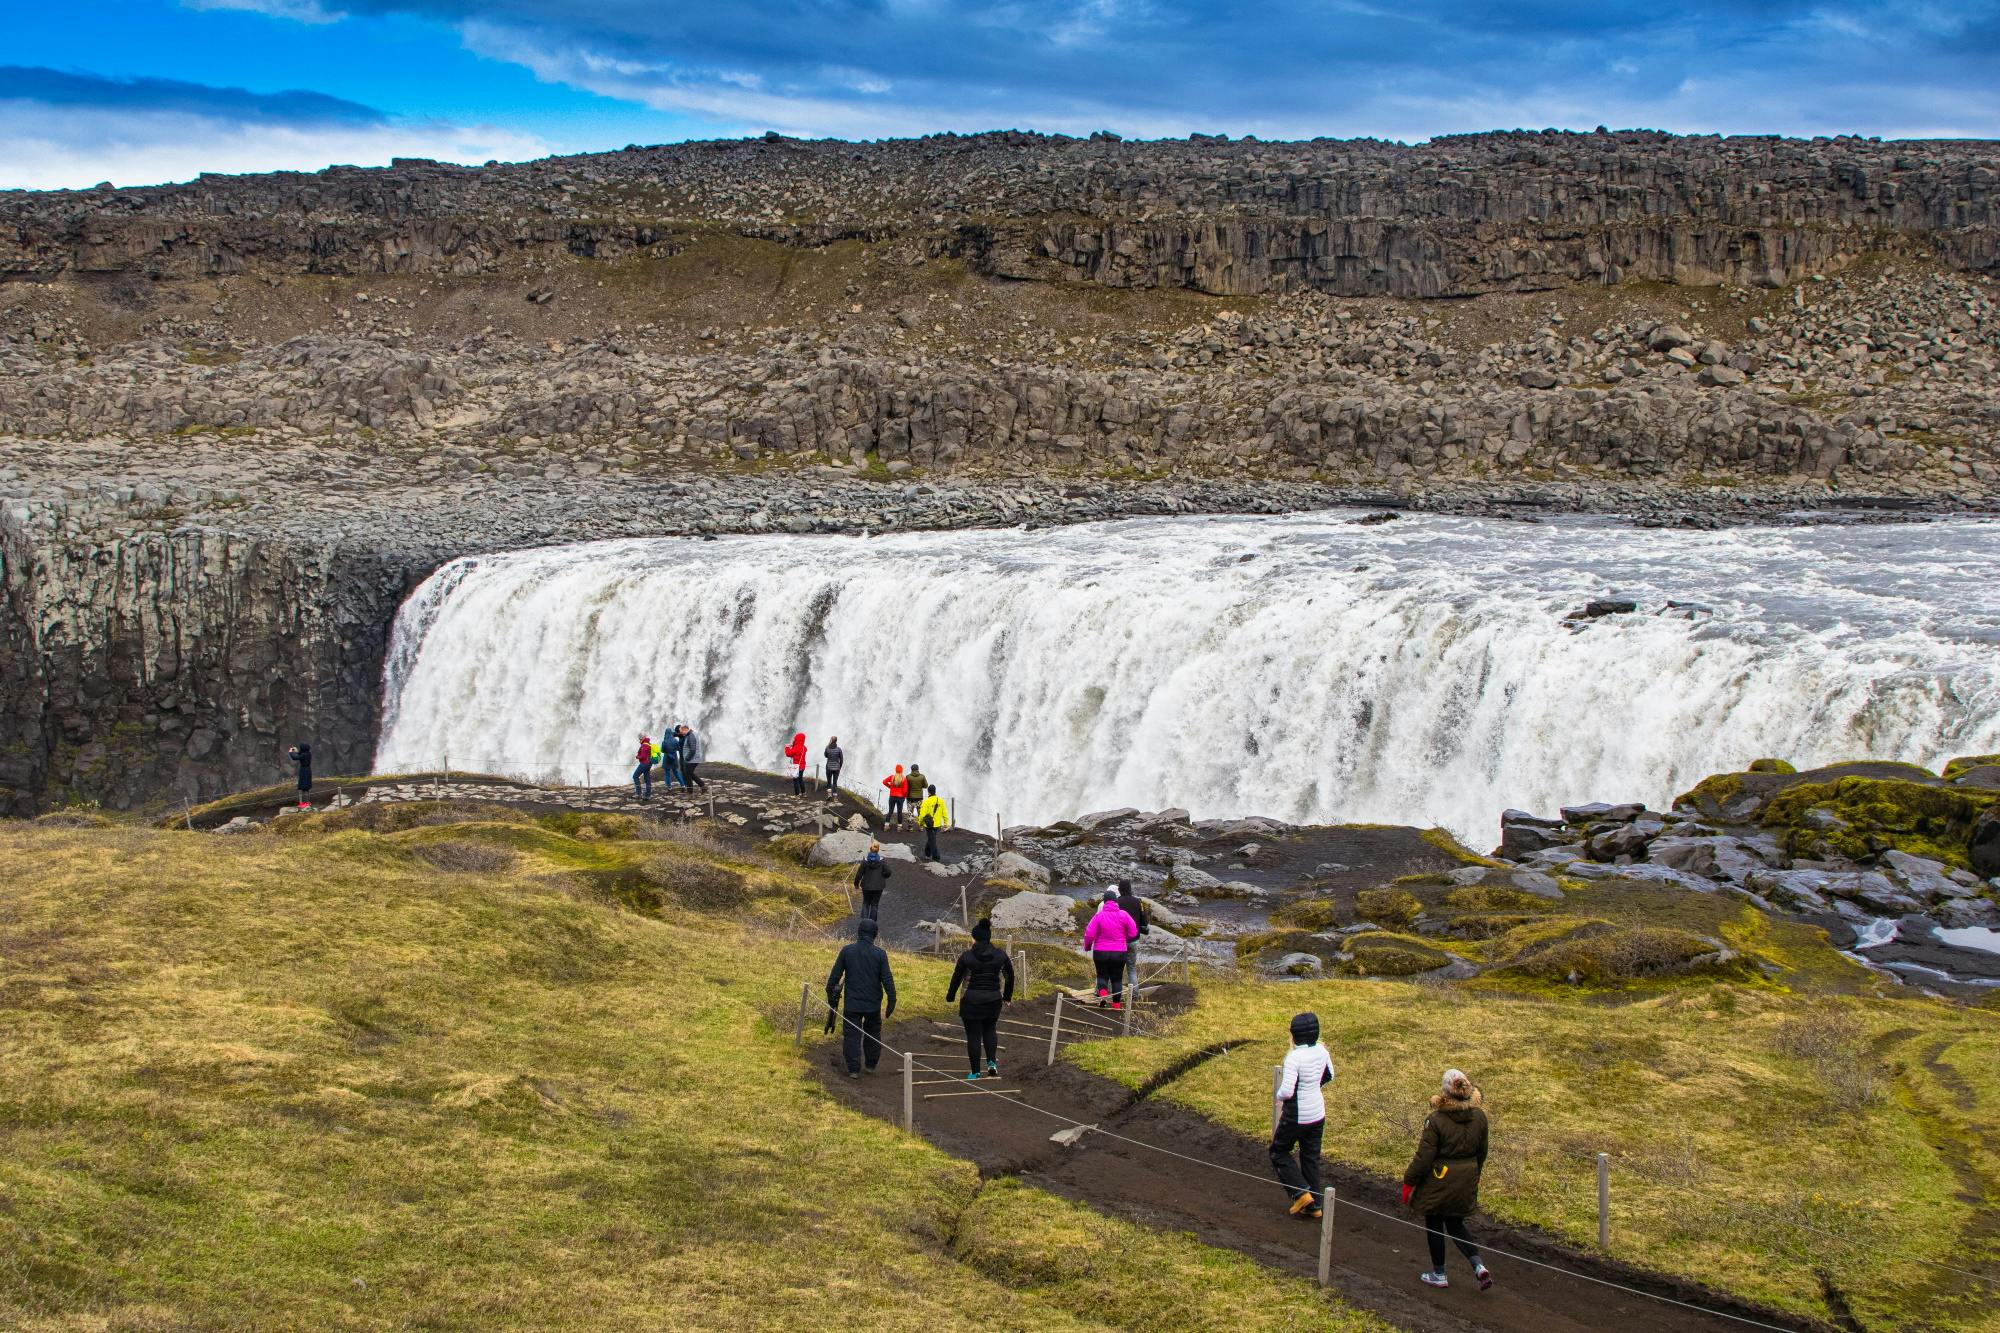 People at Dettifoss waterfall